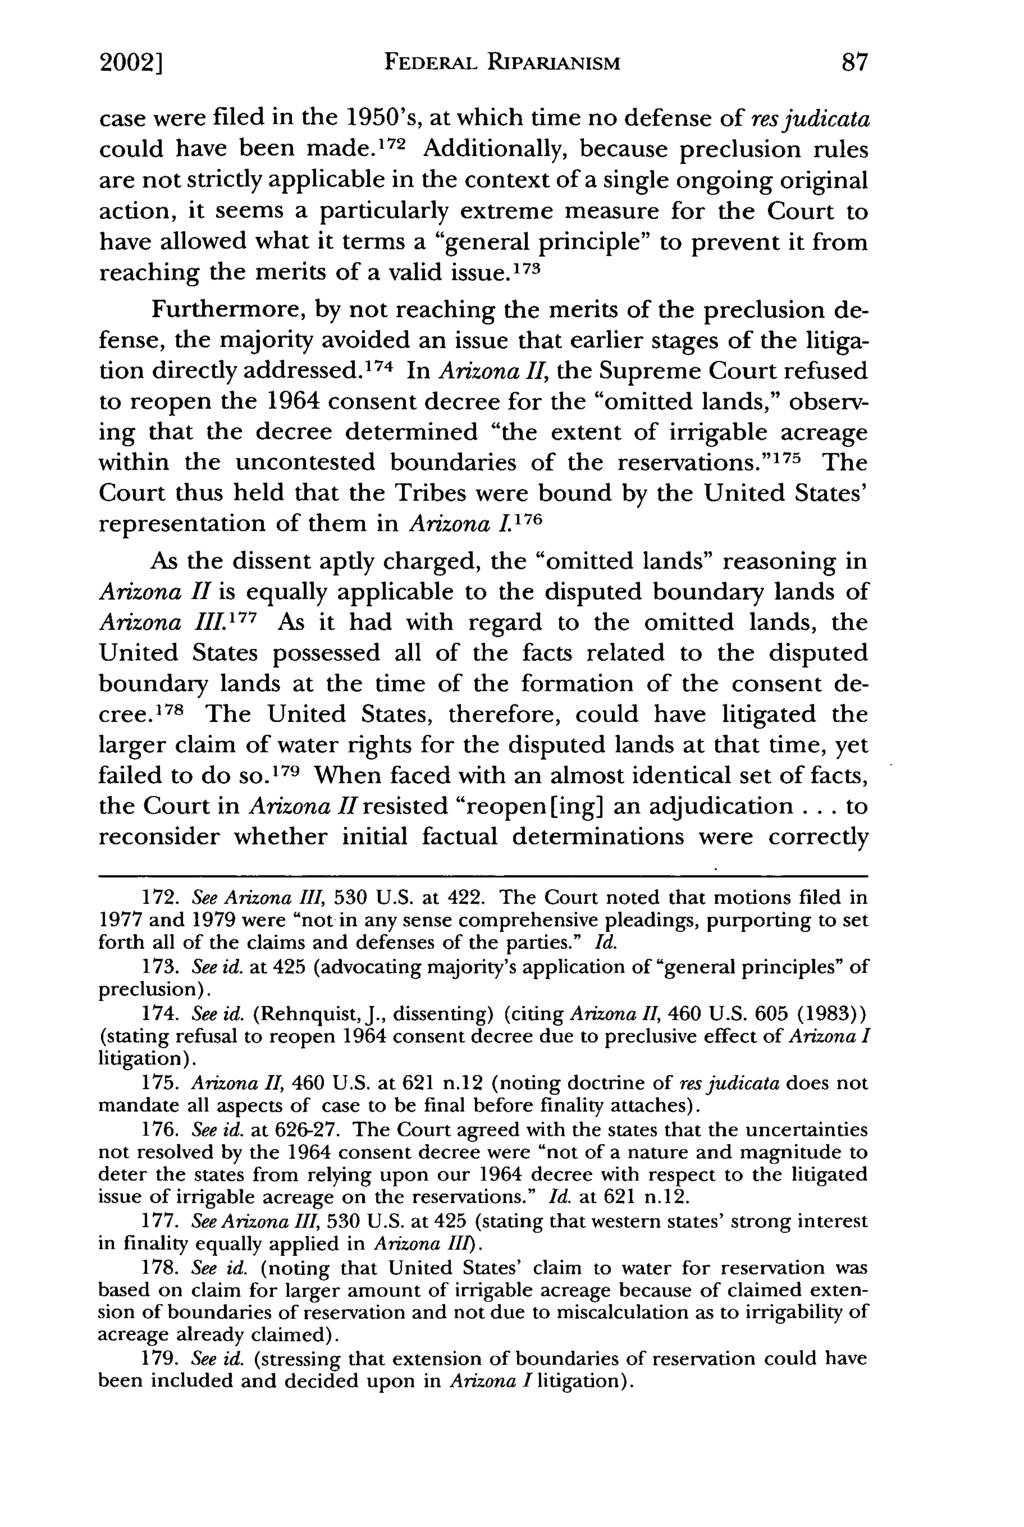 2002] Brinton: Arizona v. California: FEDERAL Riding RIPARIANISM the Wave of Federal Riparianism case were filed in the 1950's, at which time no defense of resjudicata could have been made.